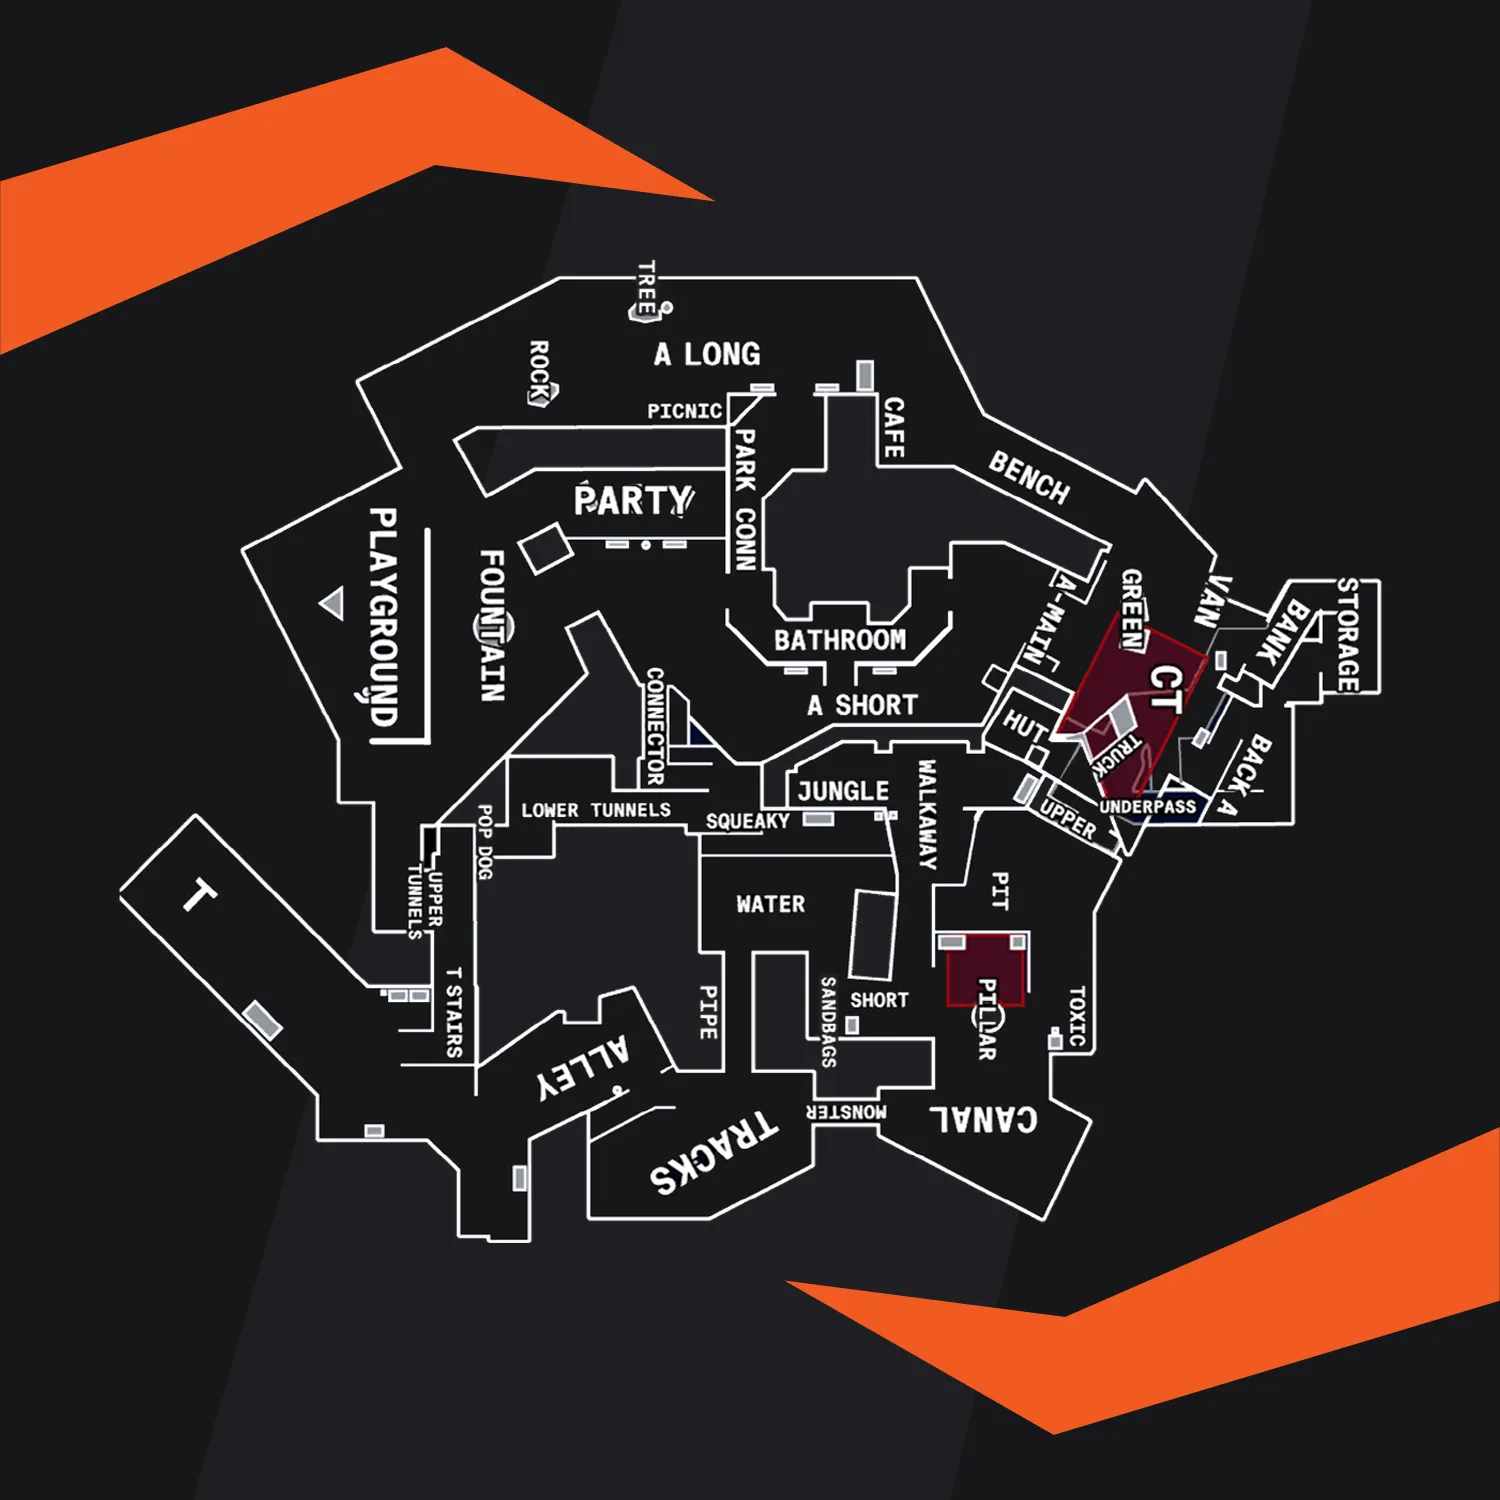 Overpass Callouts